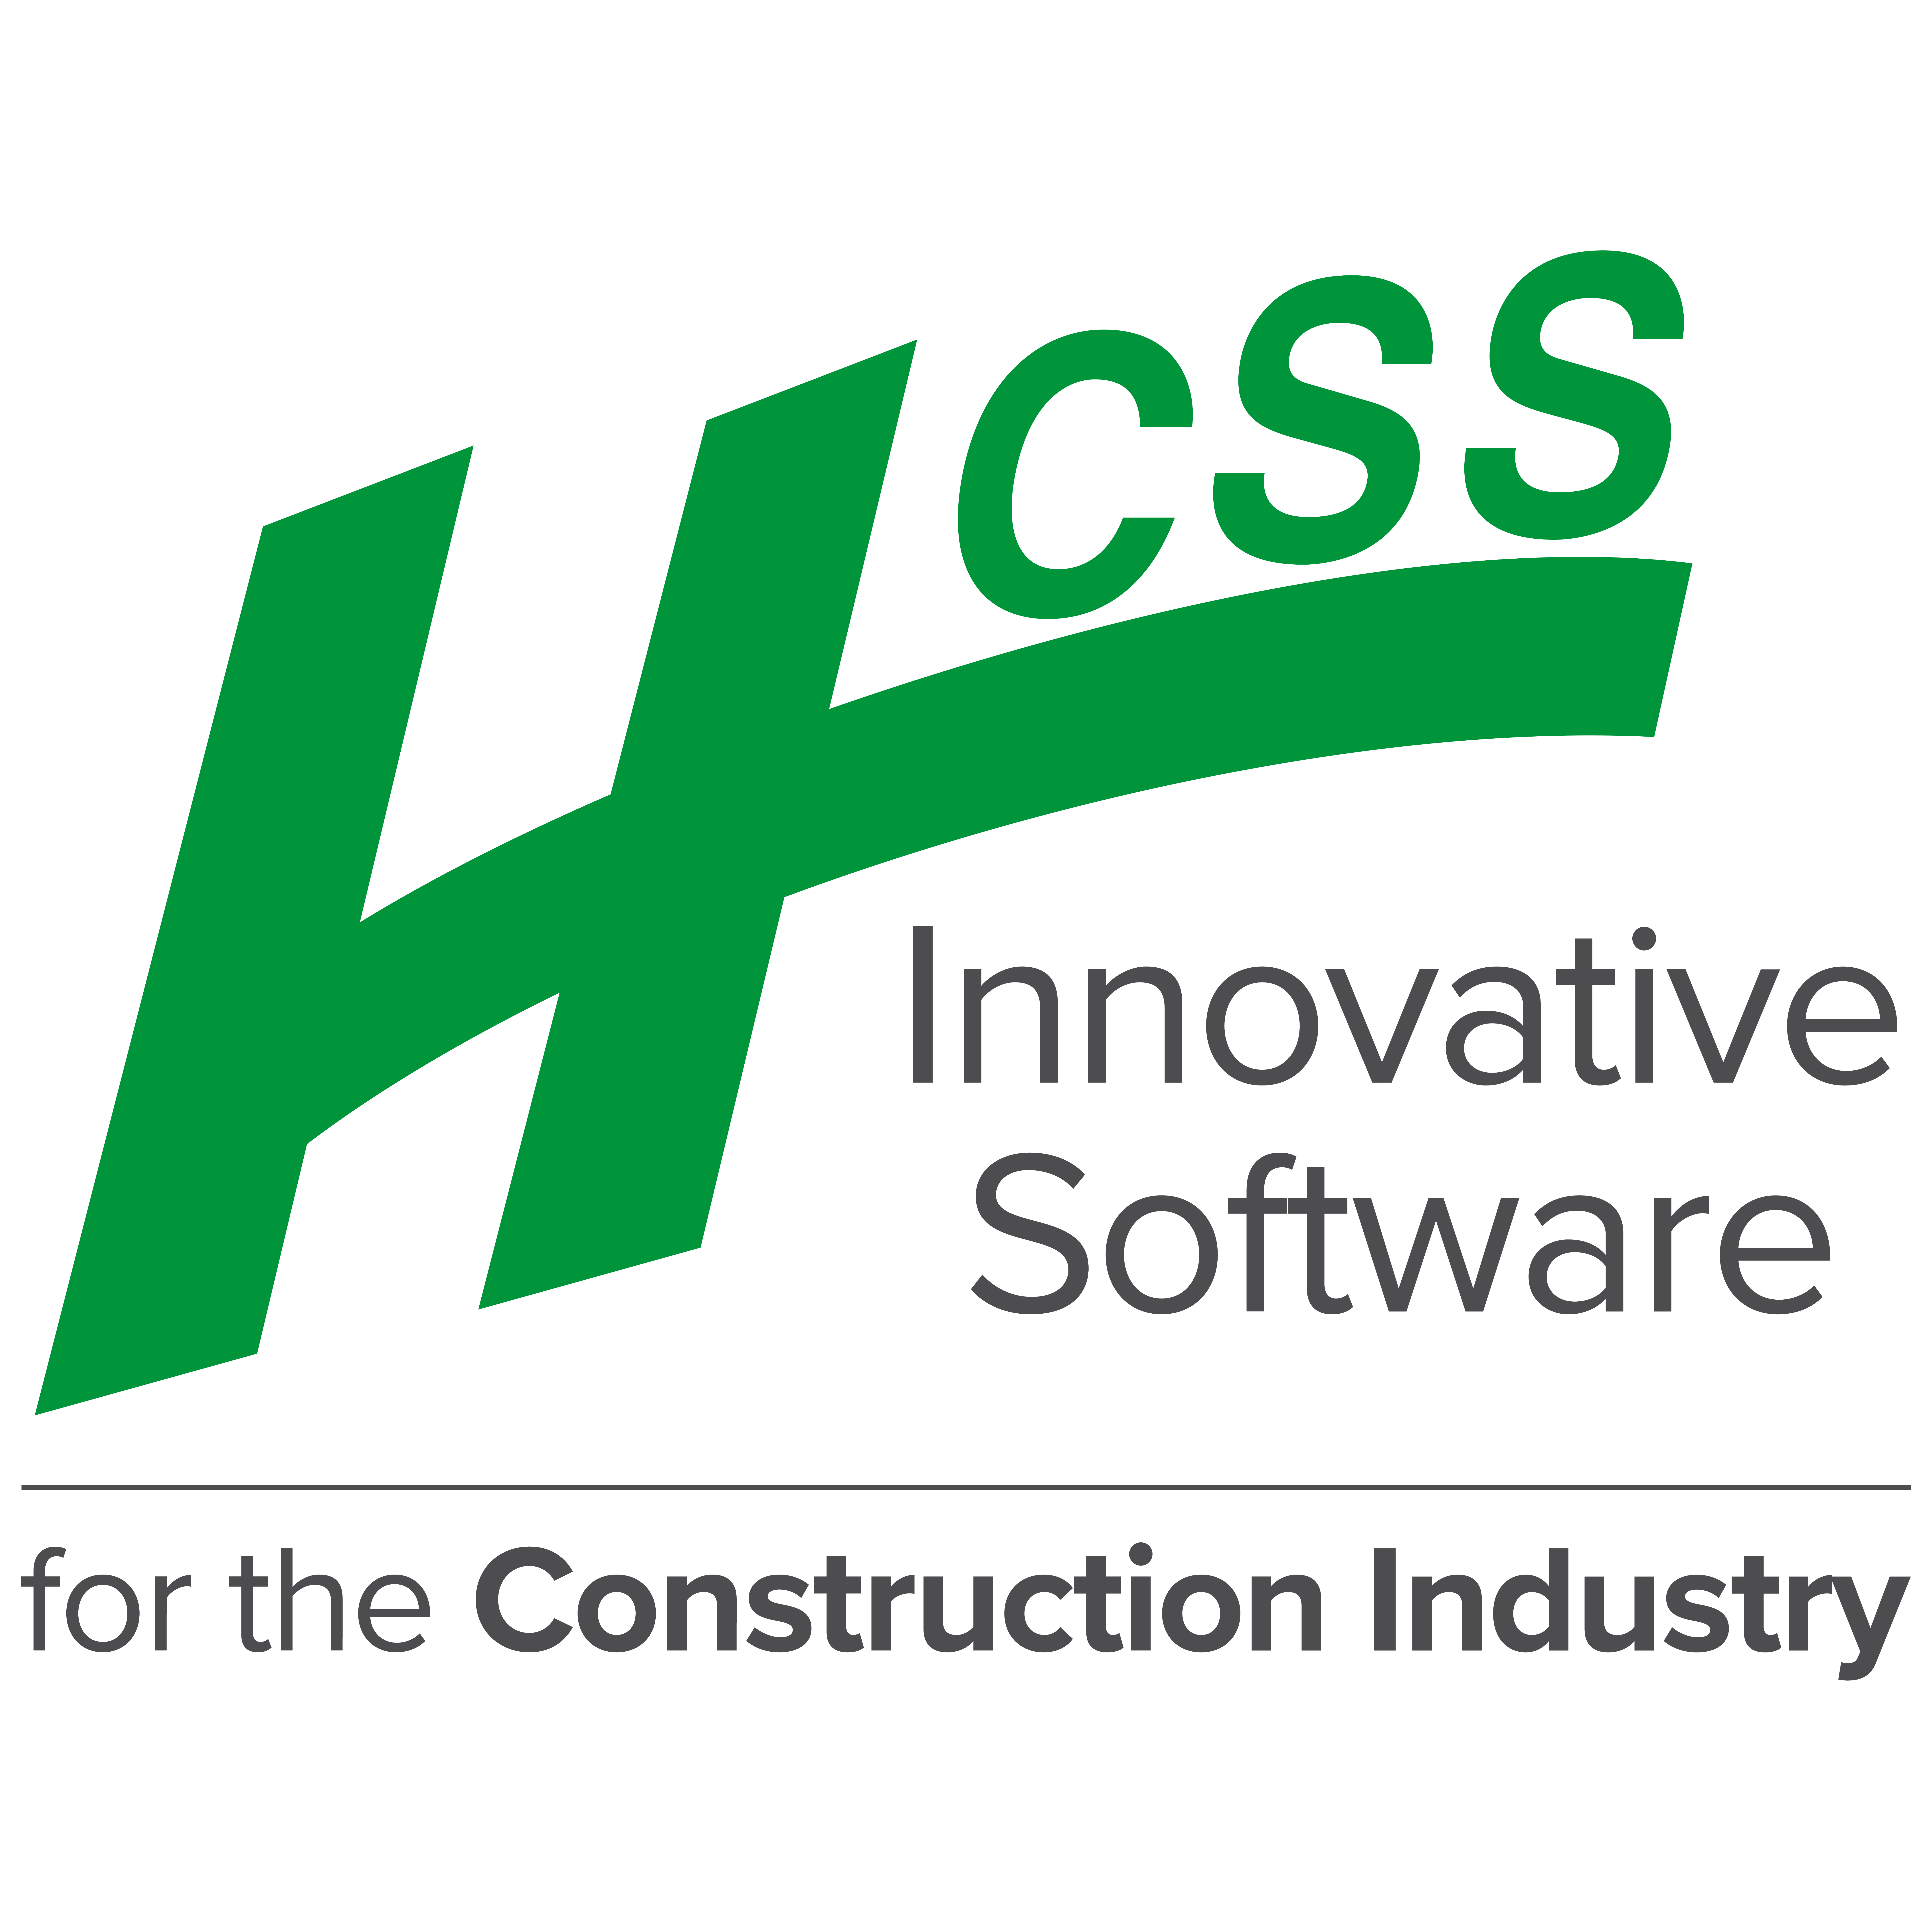 HCSS (Heavy Construction System Specialists LLC.)